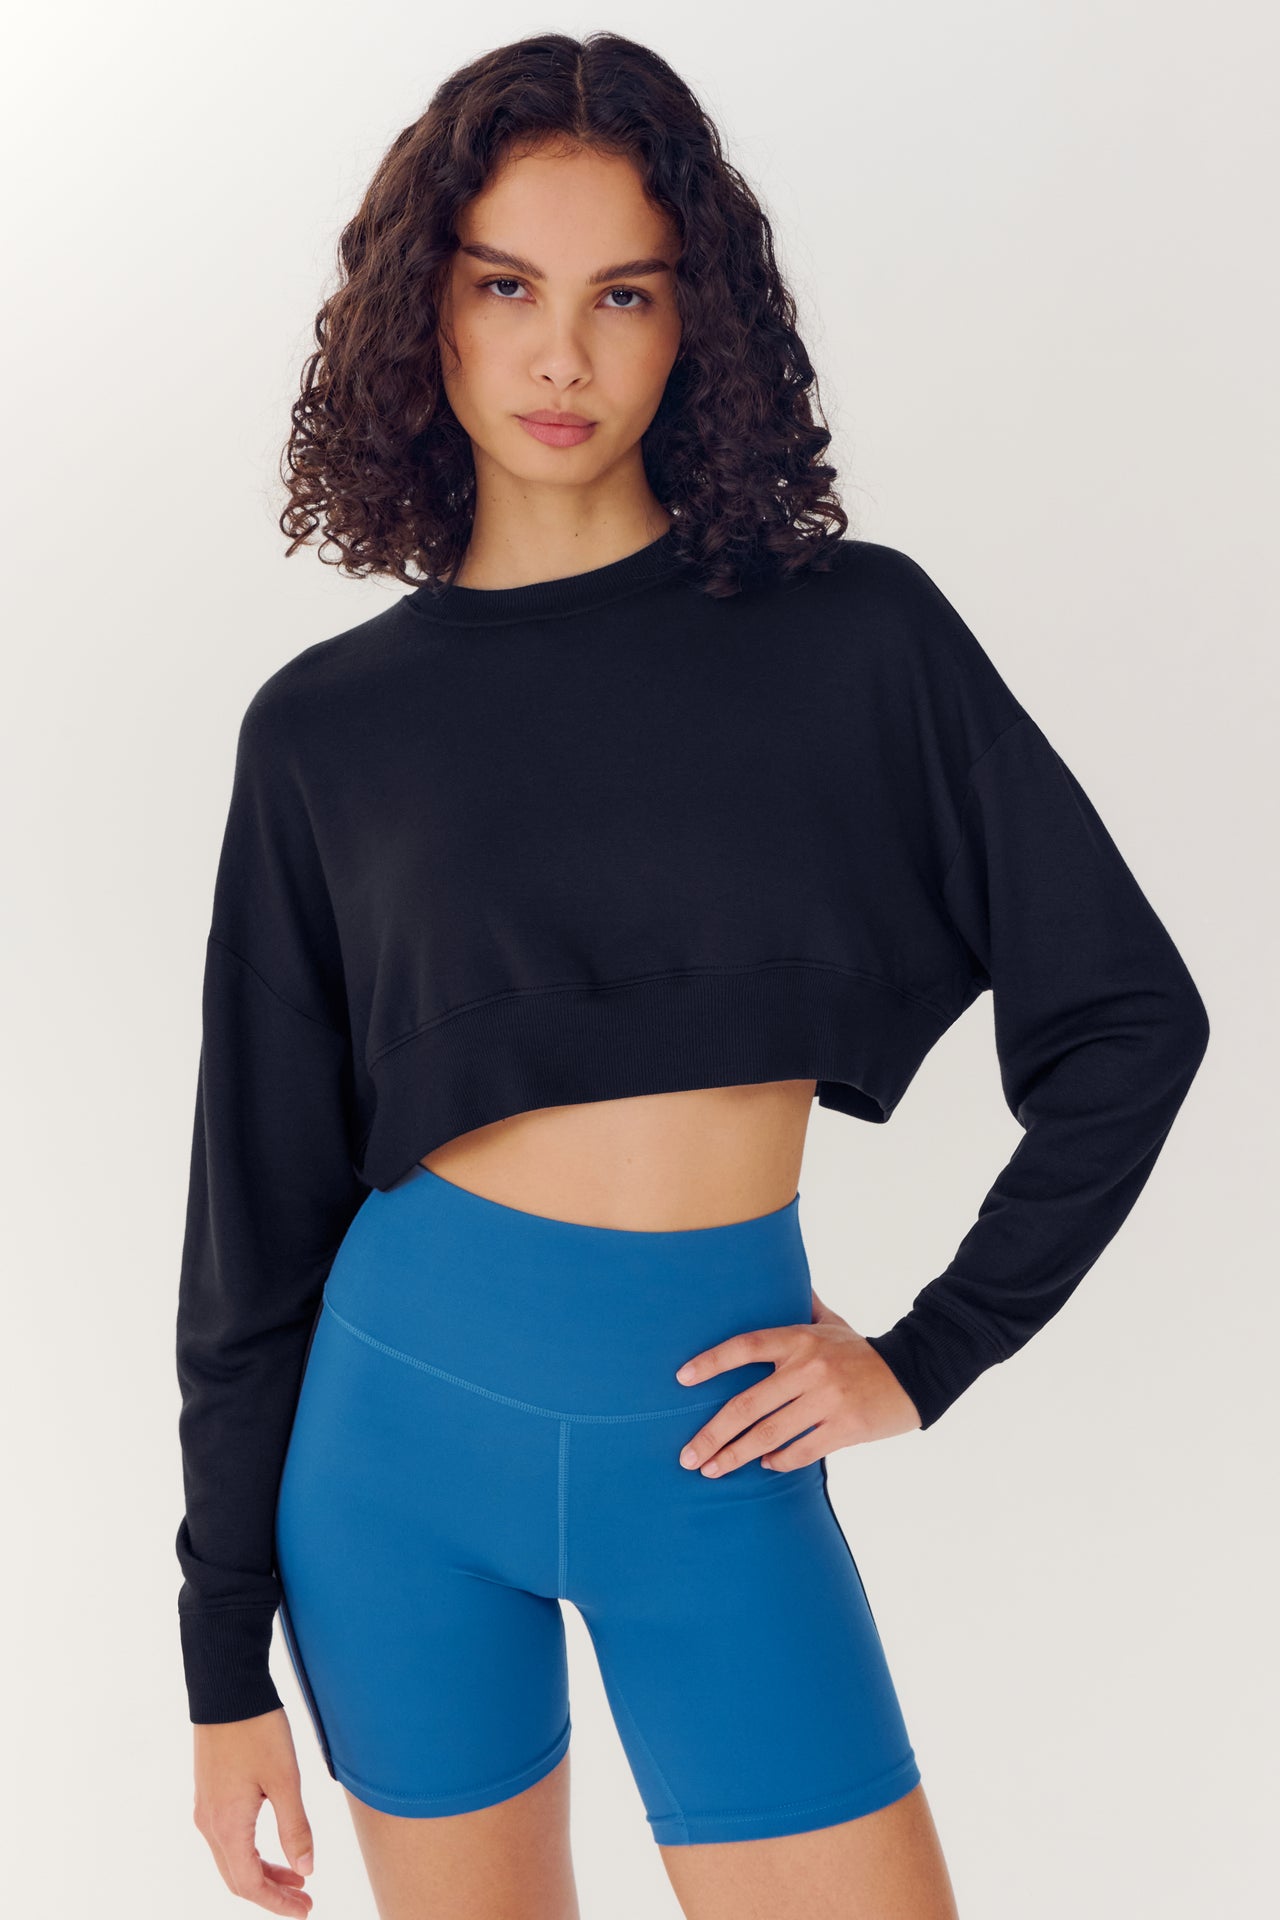 Woman wearing a SPLITS59 Noah Fleece Crop Sweatshirt in Black and blue athletic shorts, standing confidently against a white background.